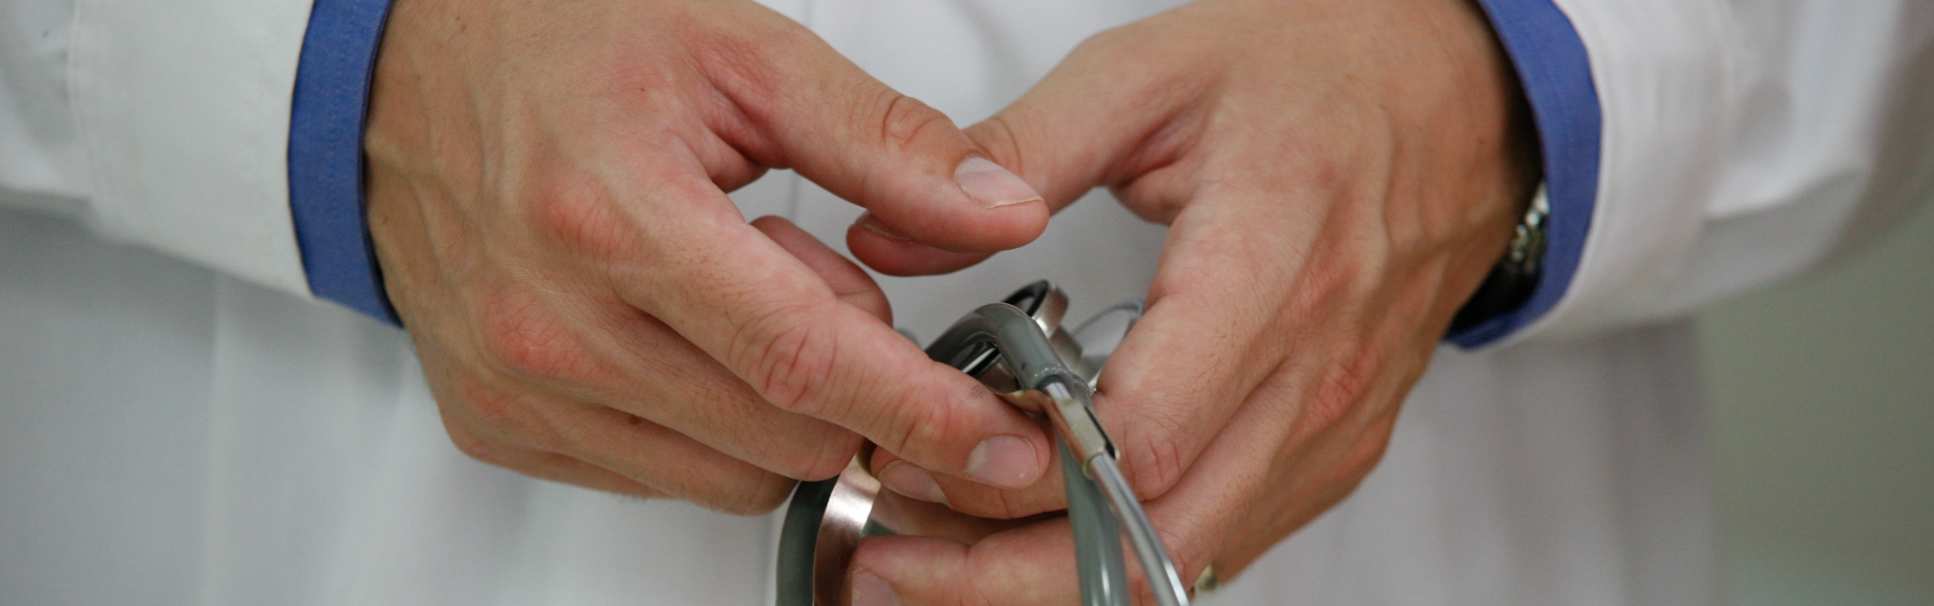 Doctor's hands holding a stethoscope